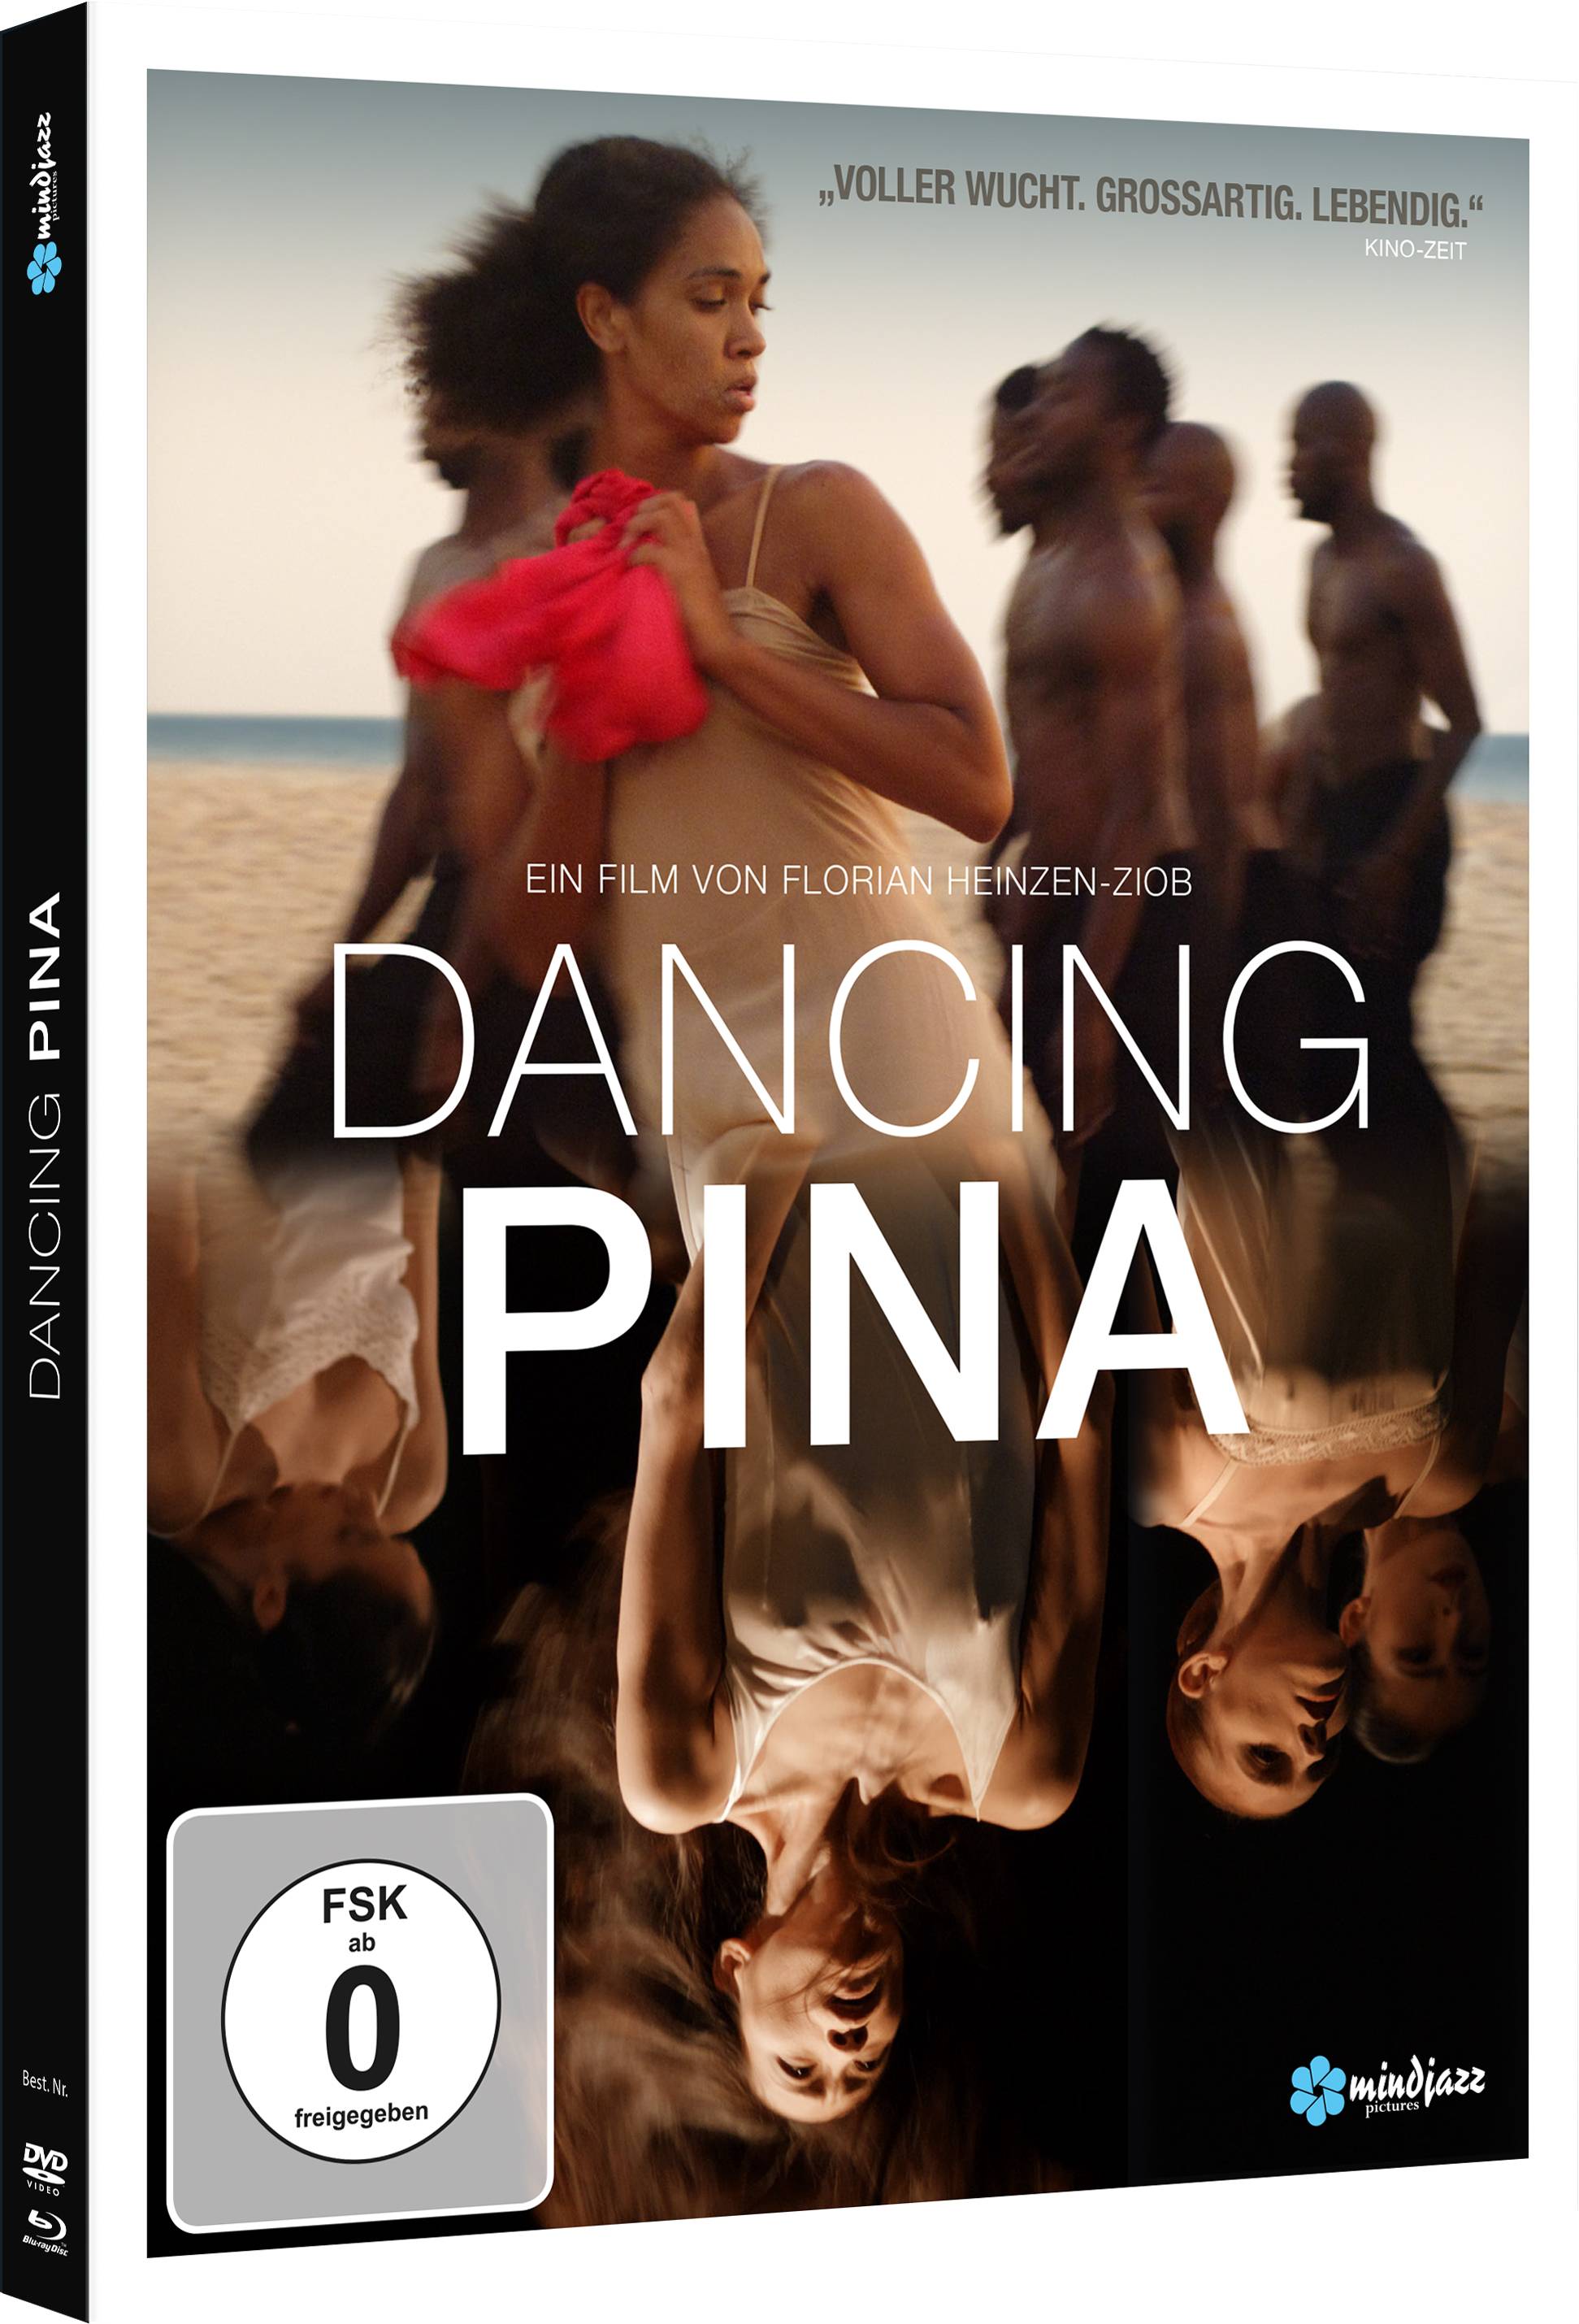 Dancing Pina (Special Edition) (DVD + Blu-ray) (inkl. Booklet & Postkarten)